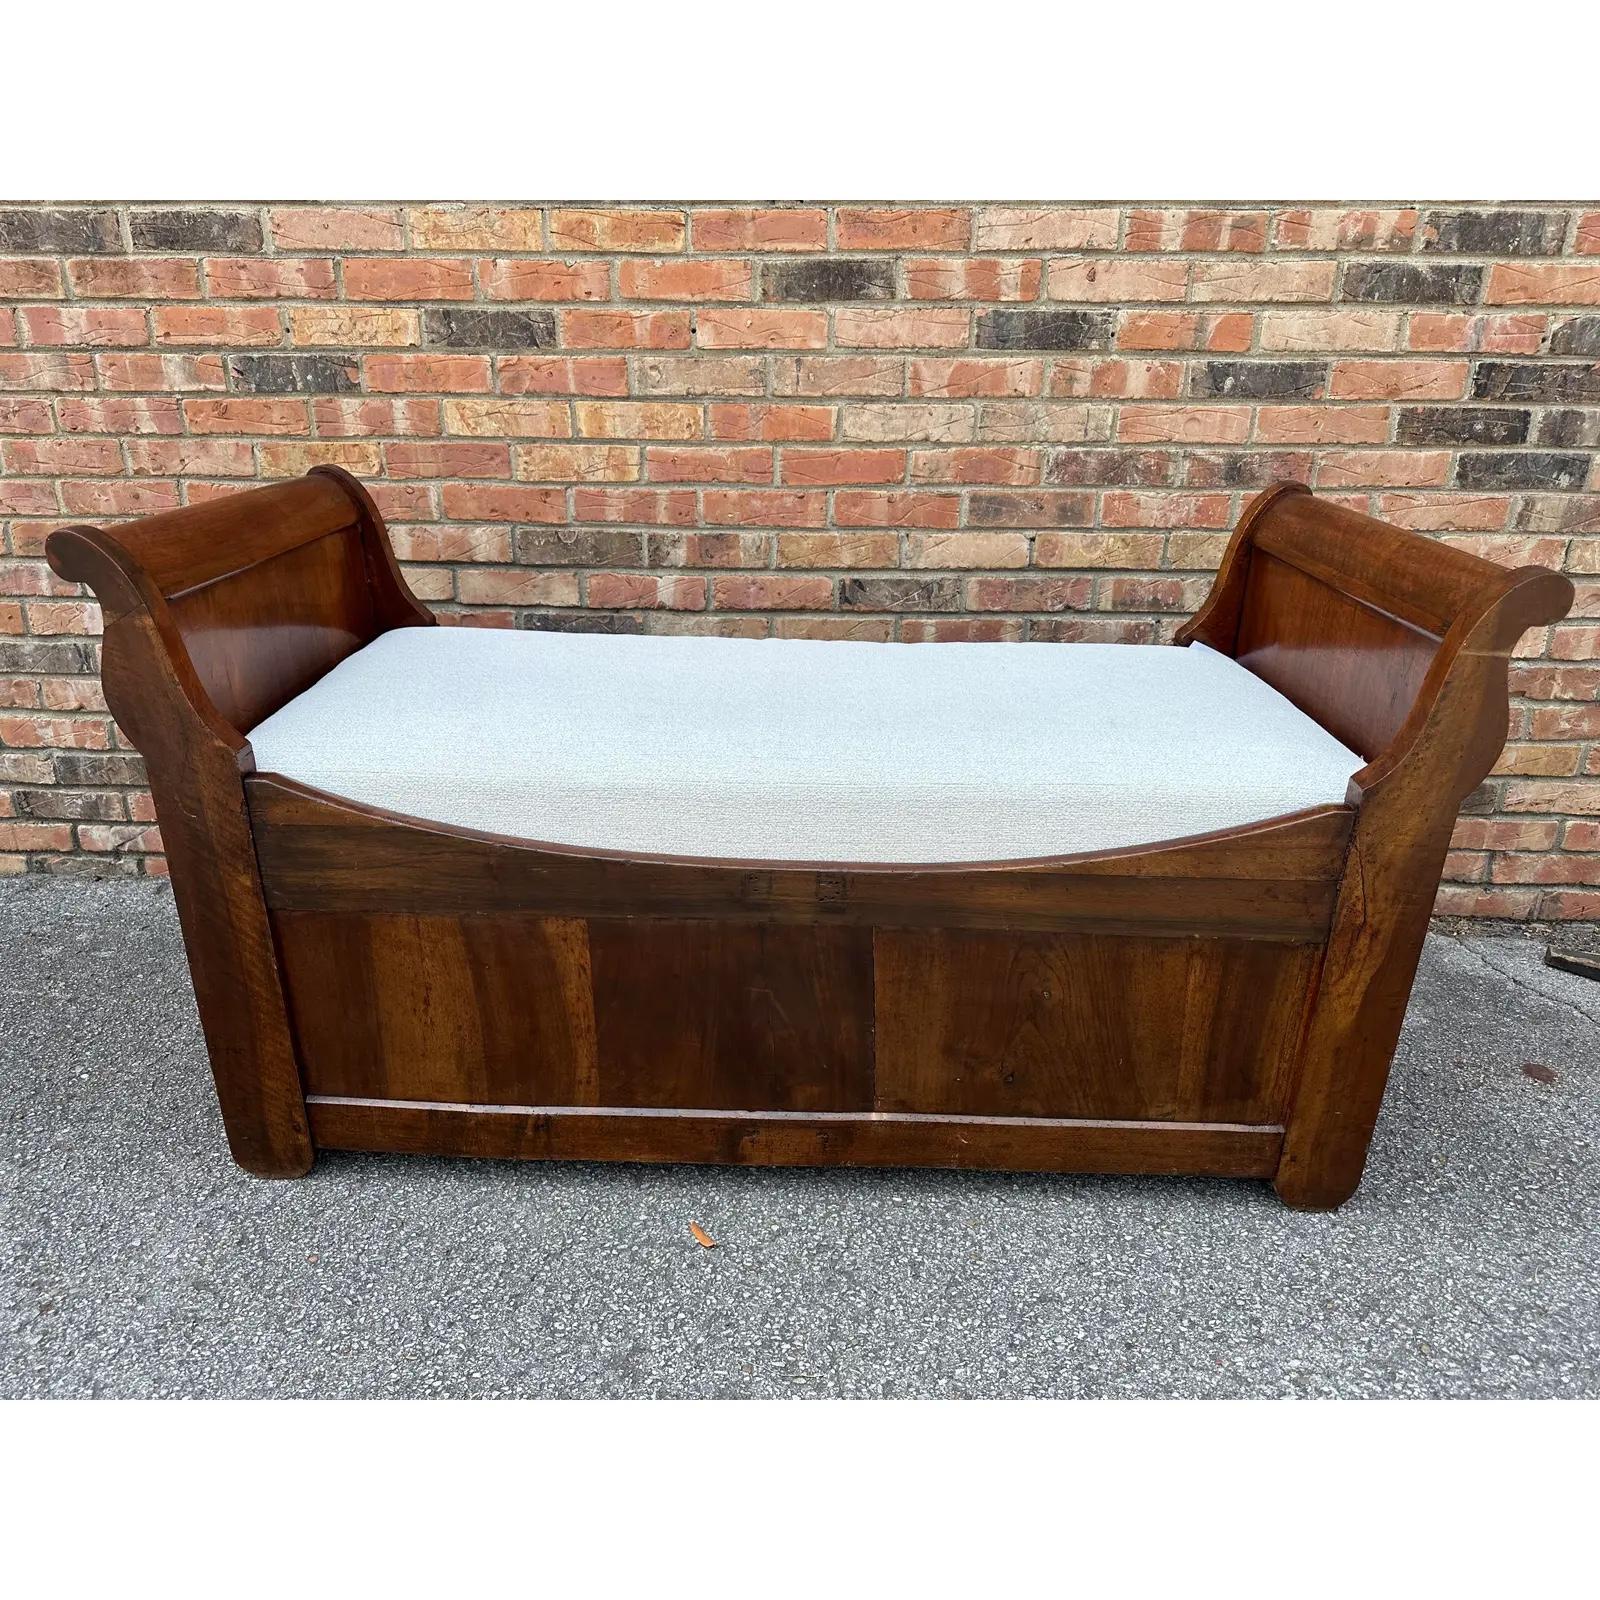 Late 19th Century Antique French Day Bed For Sale